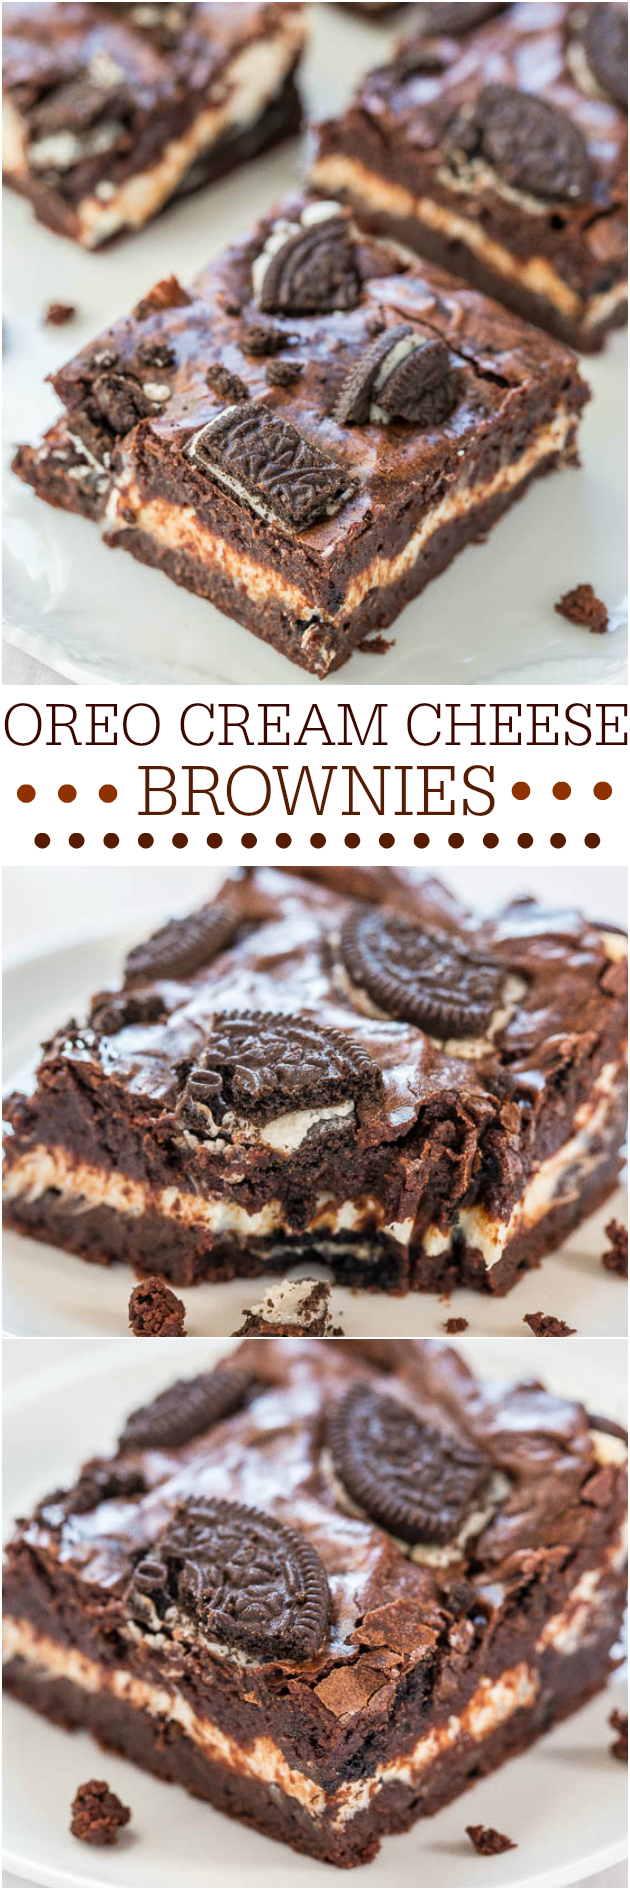 Oreo Cream Cheese Brownies - Fudgy brownies with a layer of cream cheese and tons of Oreos! They'll be your new favorites! Totally amazing!!